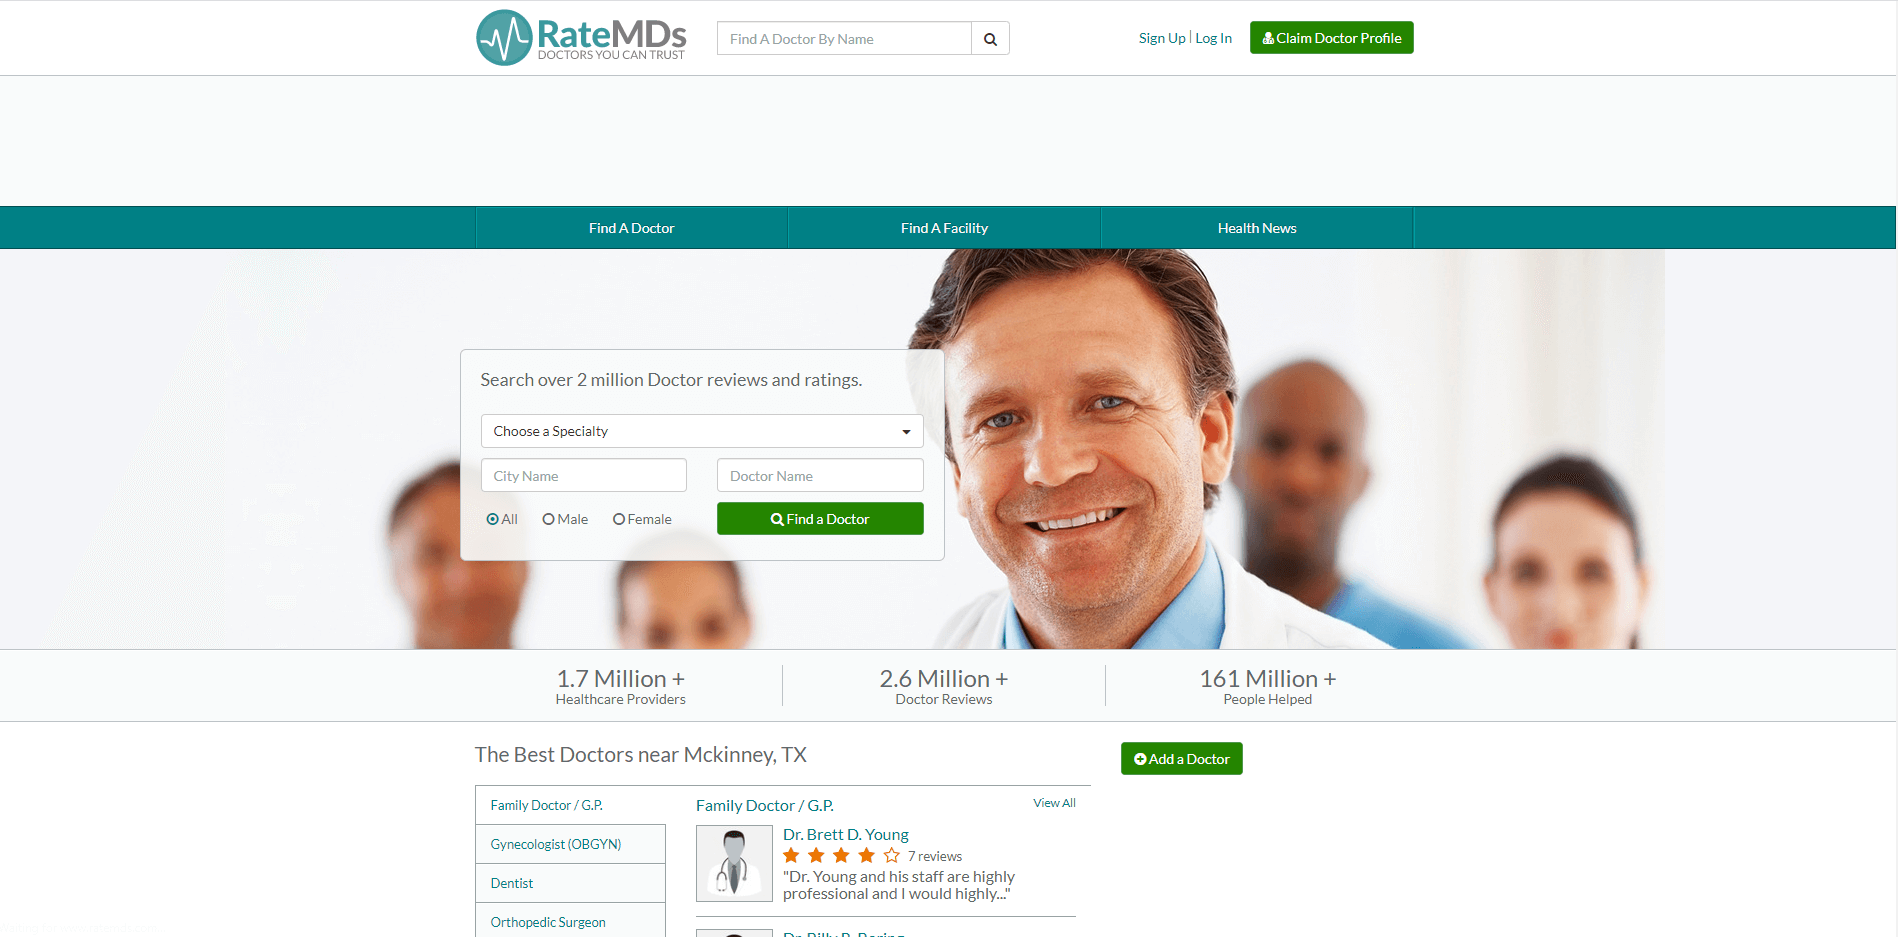 Screenshot of the RateMDs.com home page